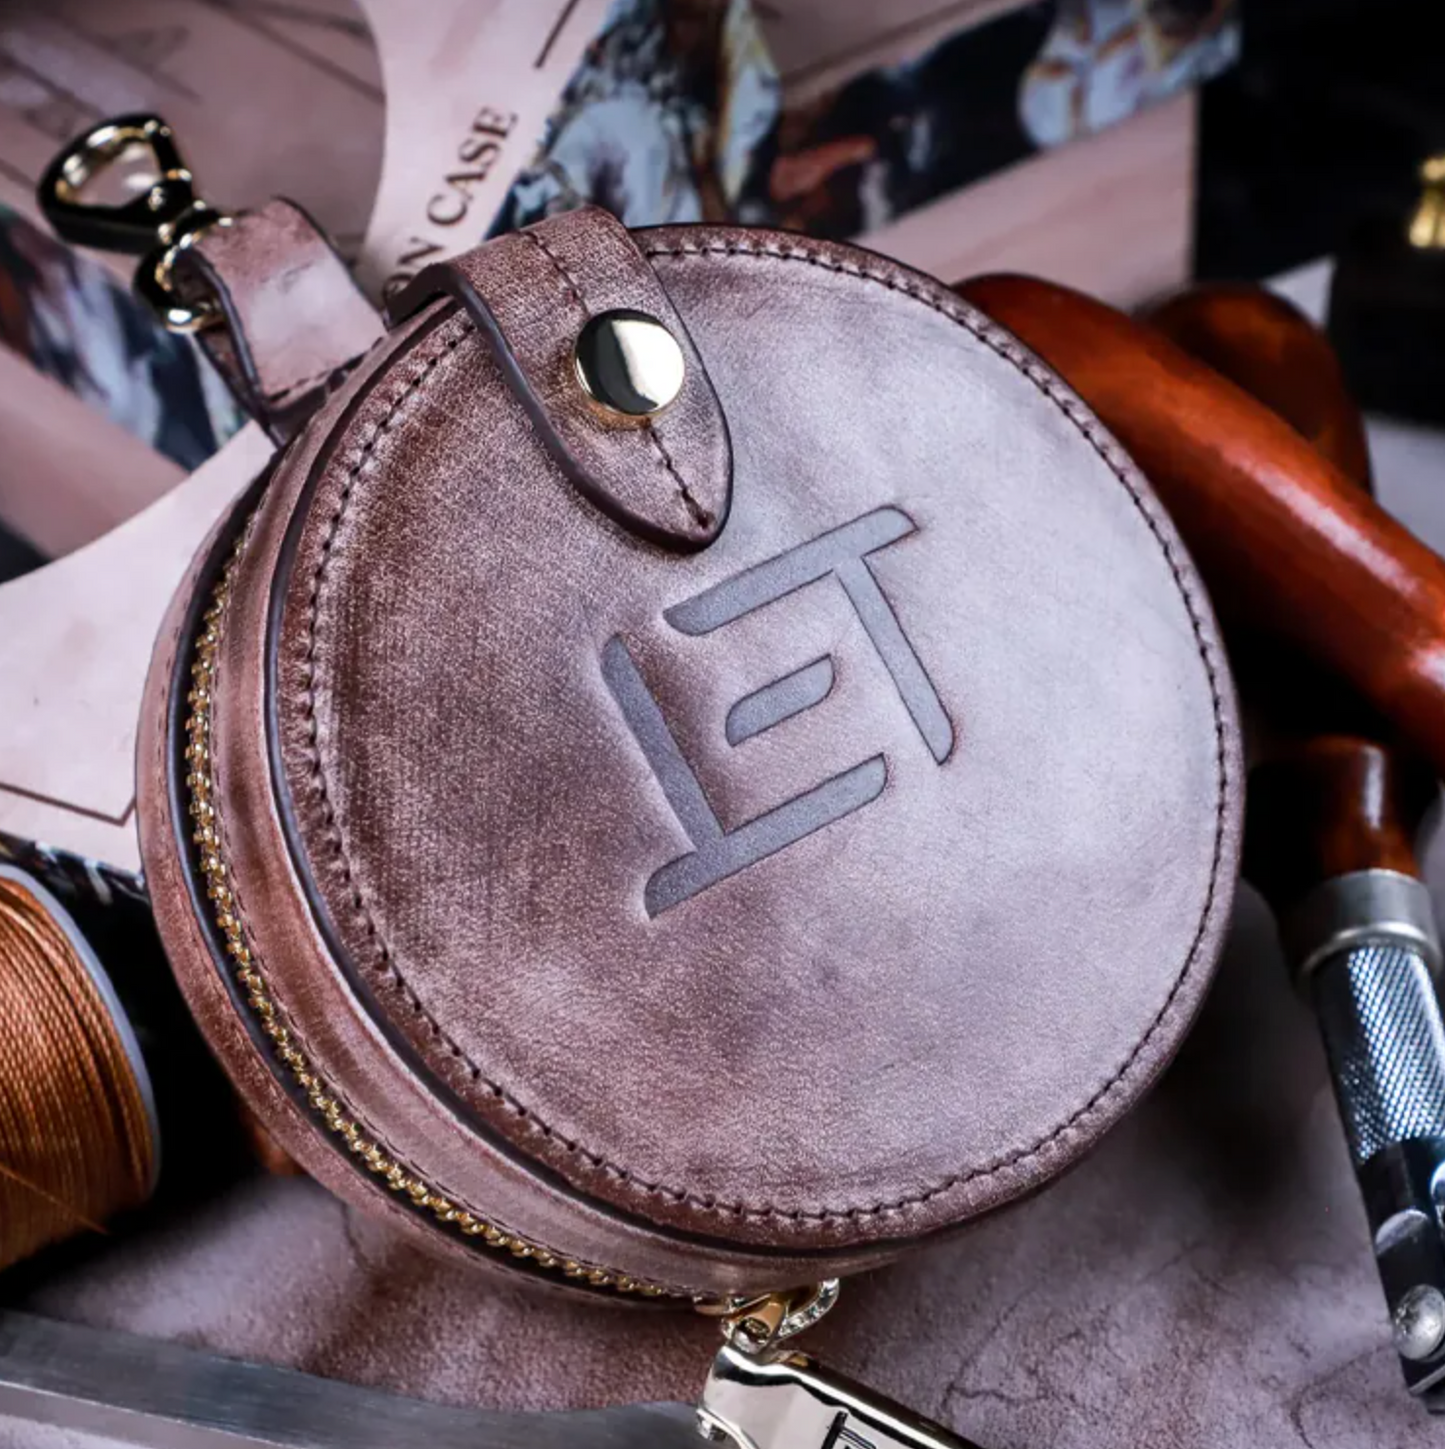 Eletech Cavalry limited edition antelope leather storage box